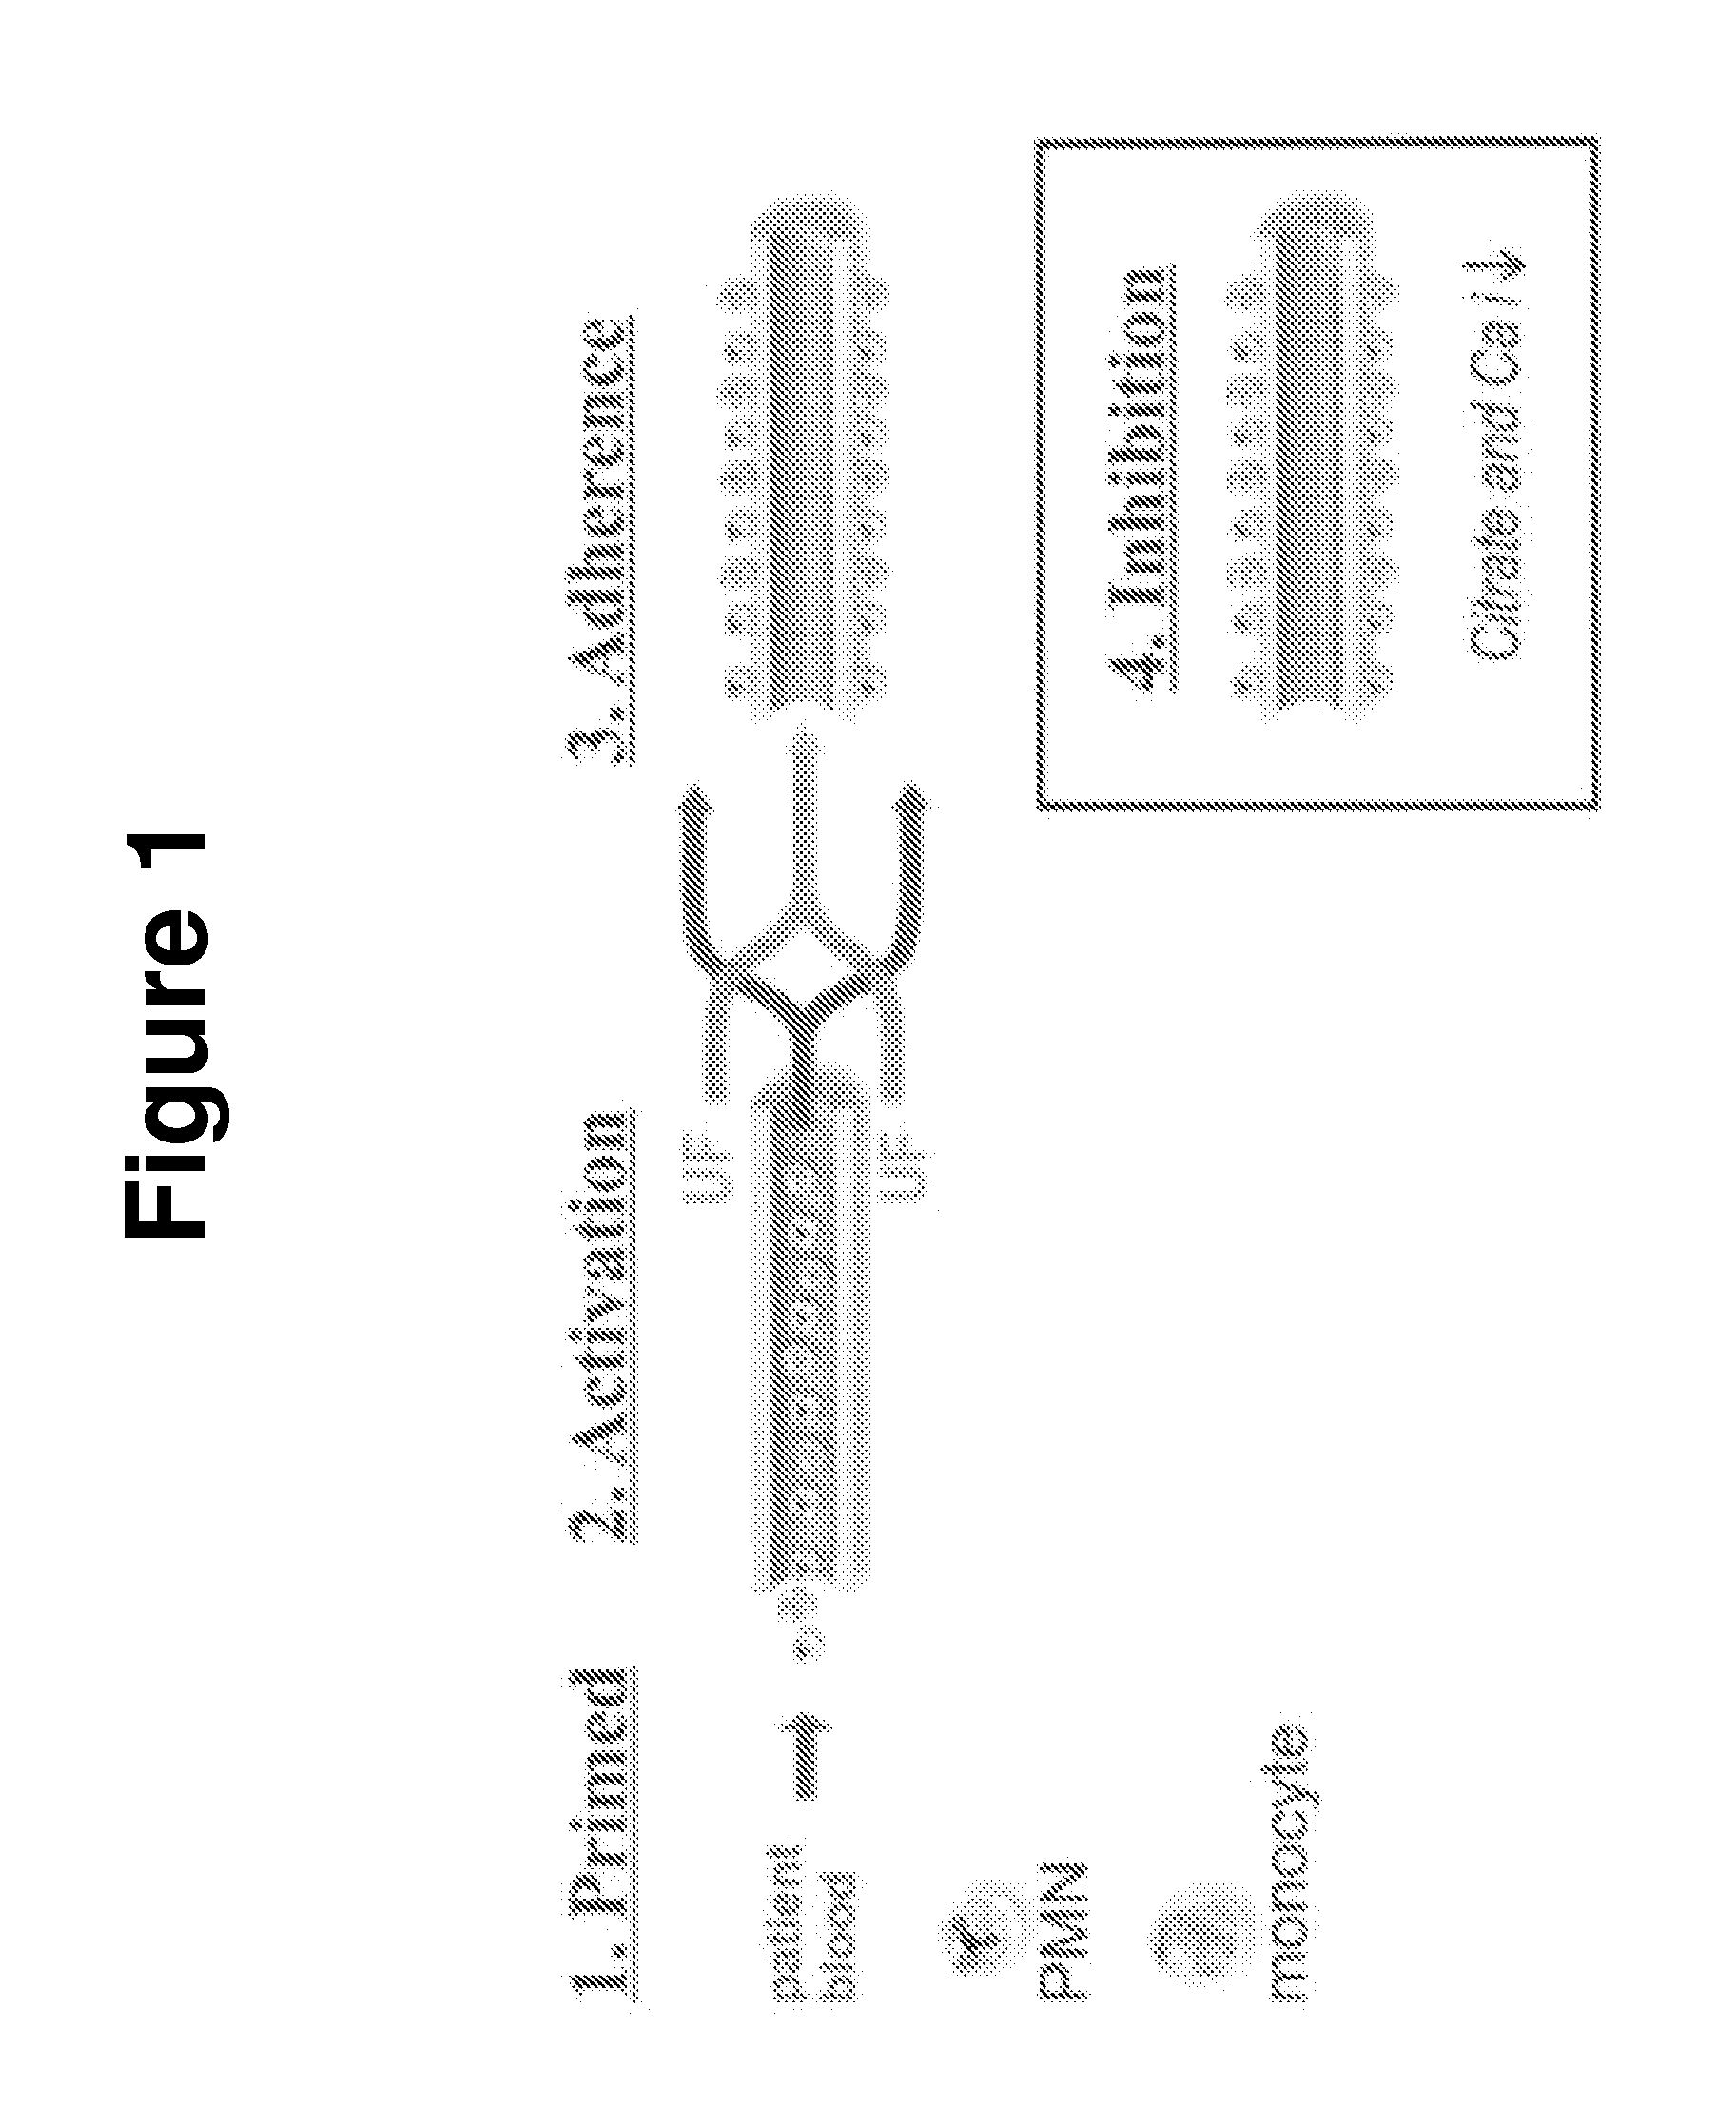 Selective cytopheresis devices and related methods thereof